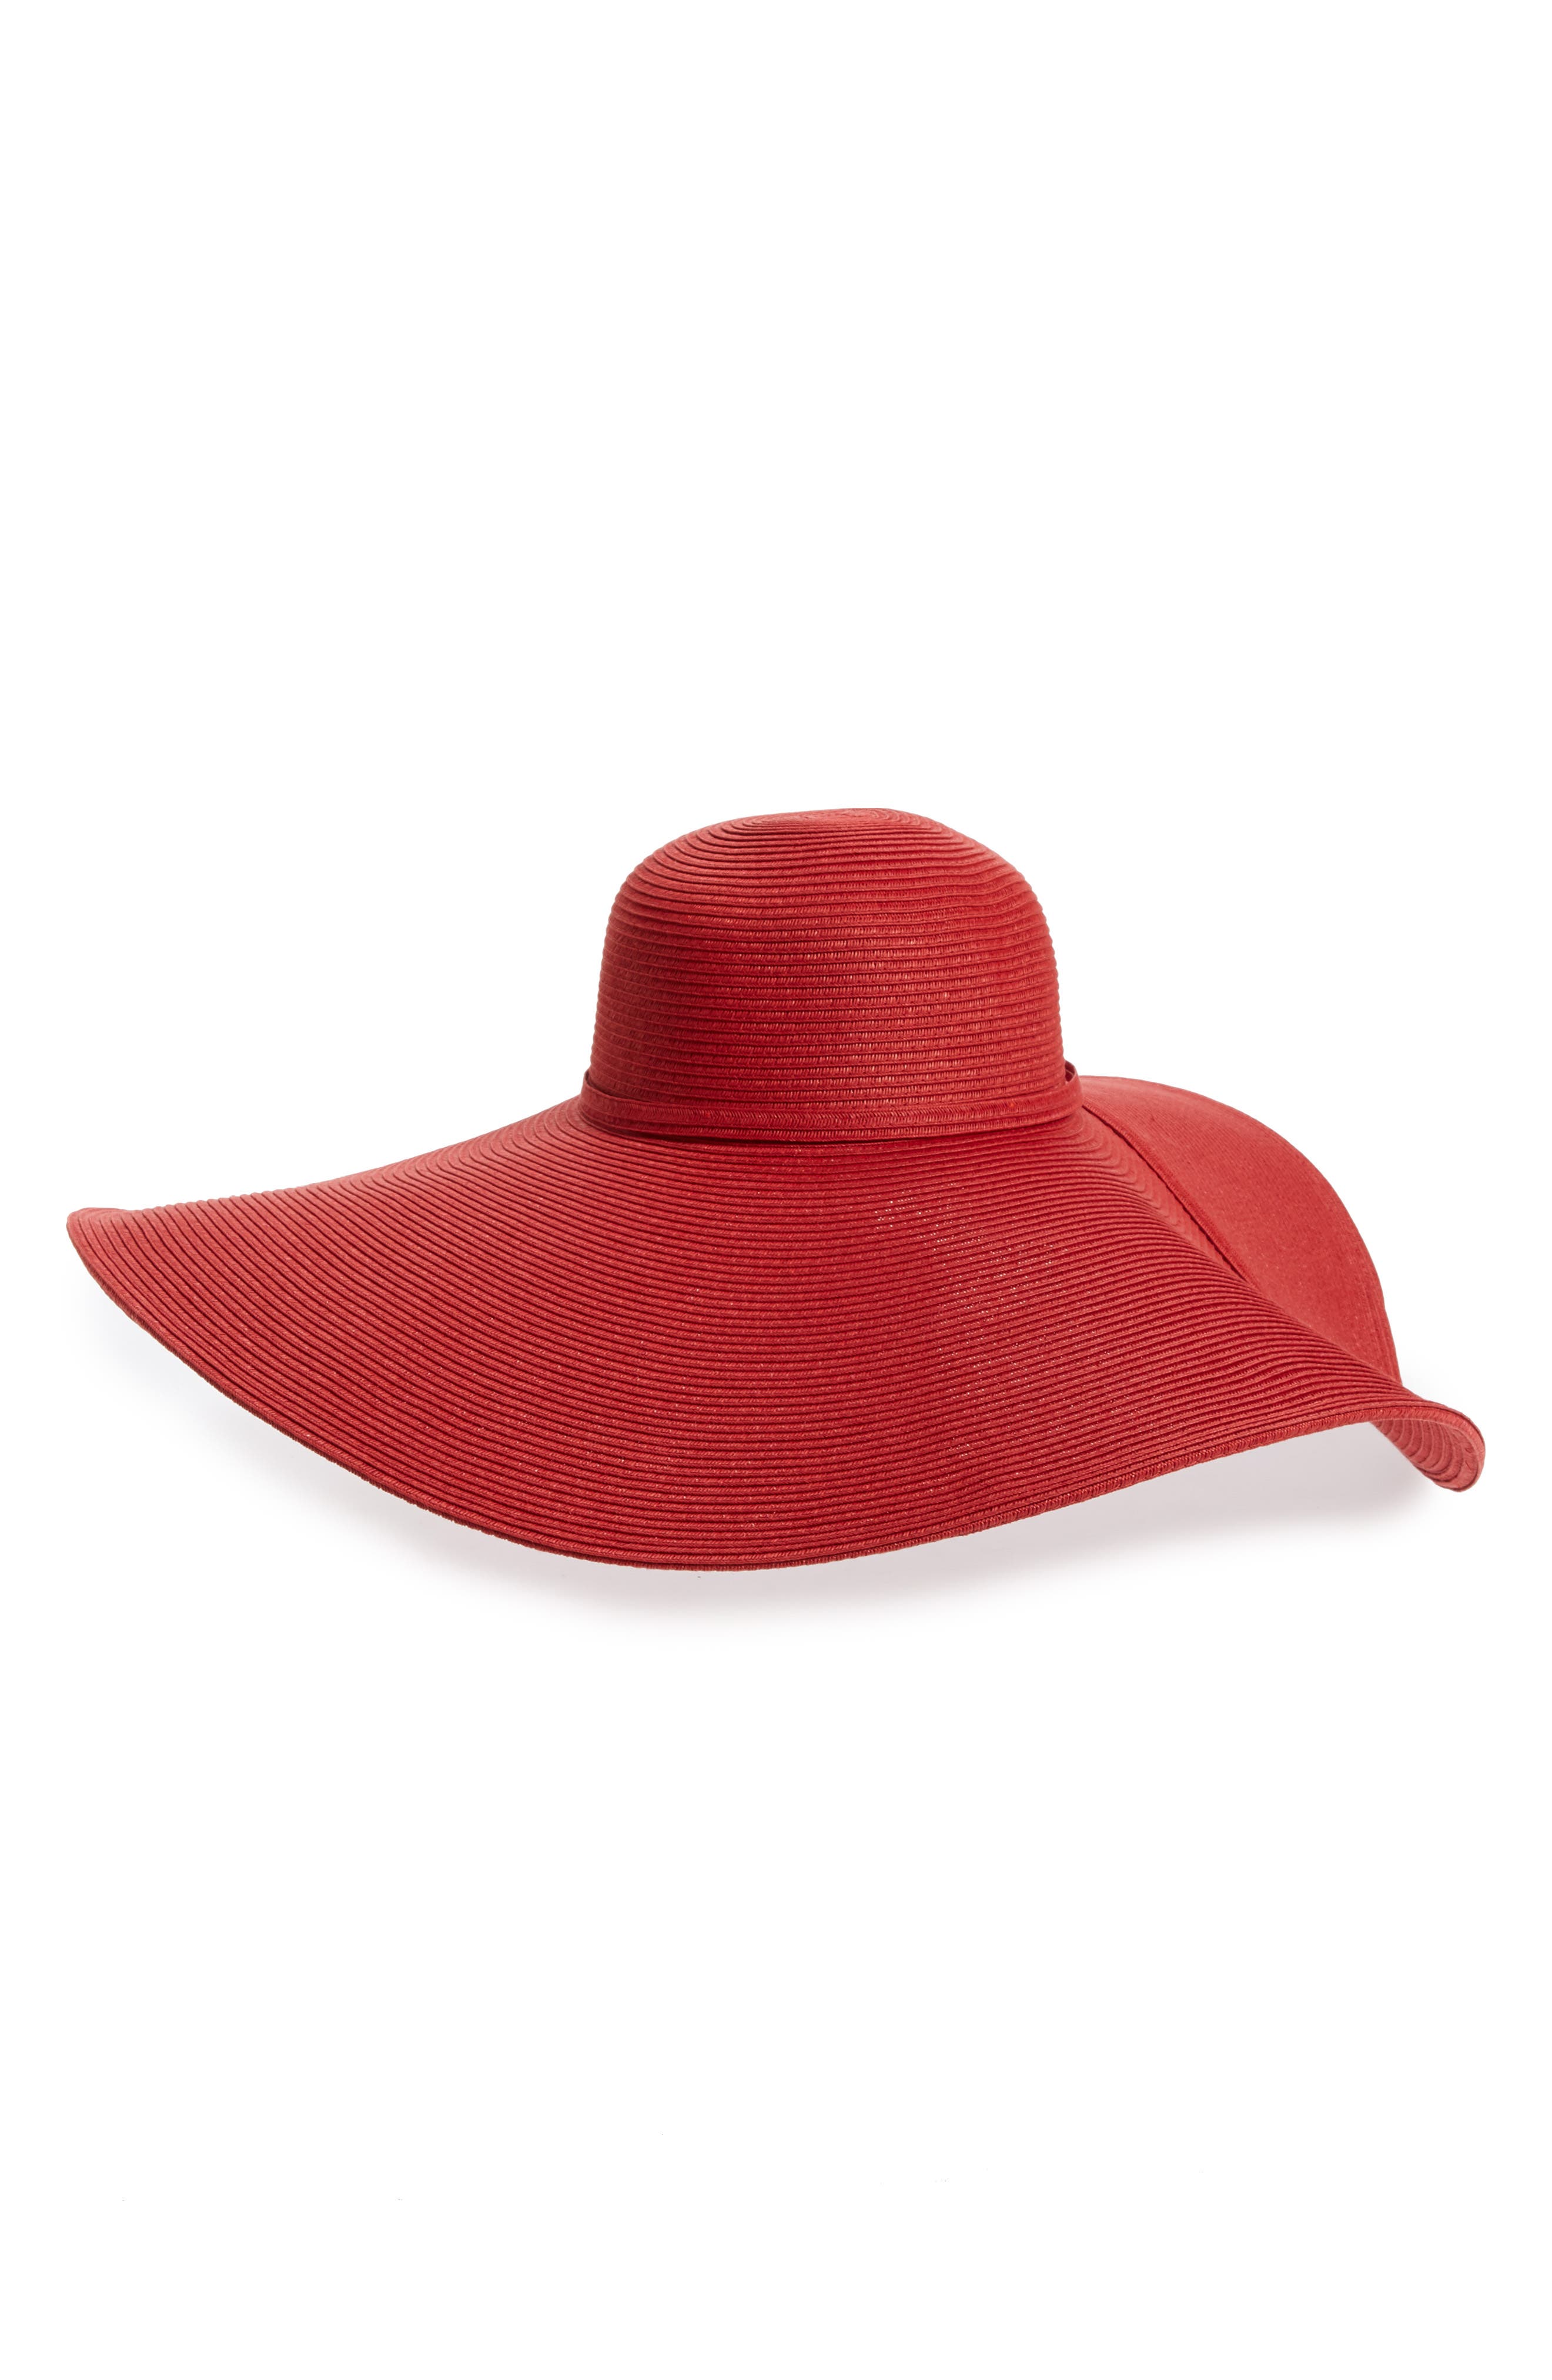 red hats for women